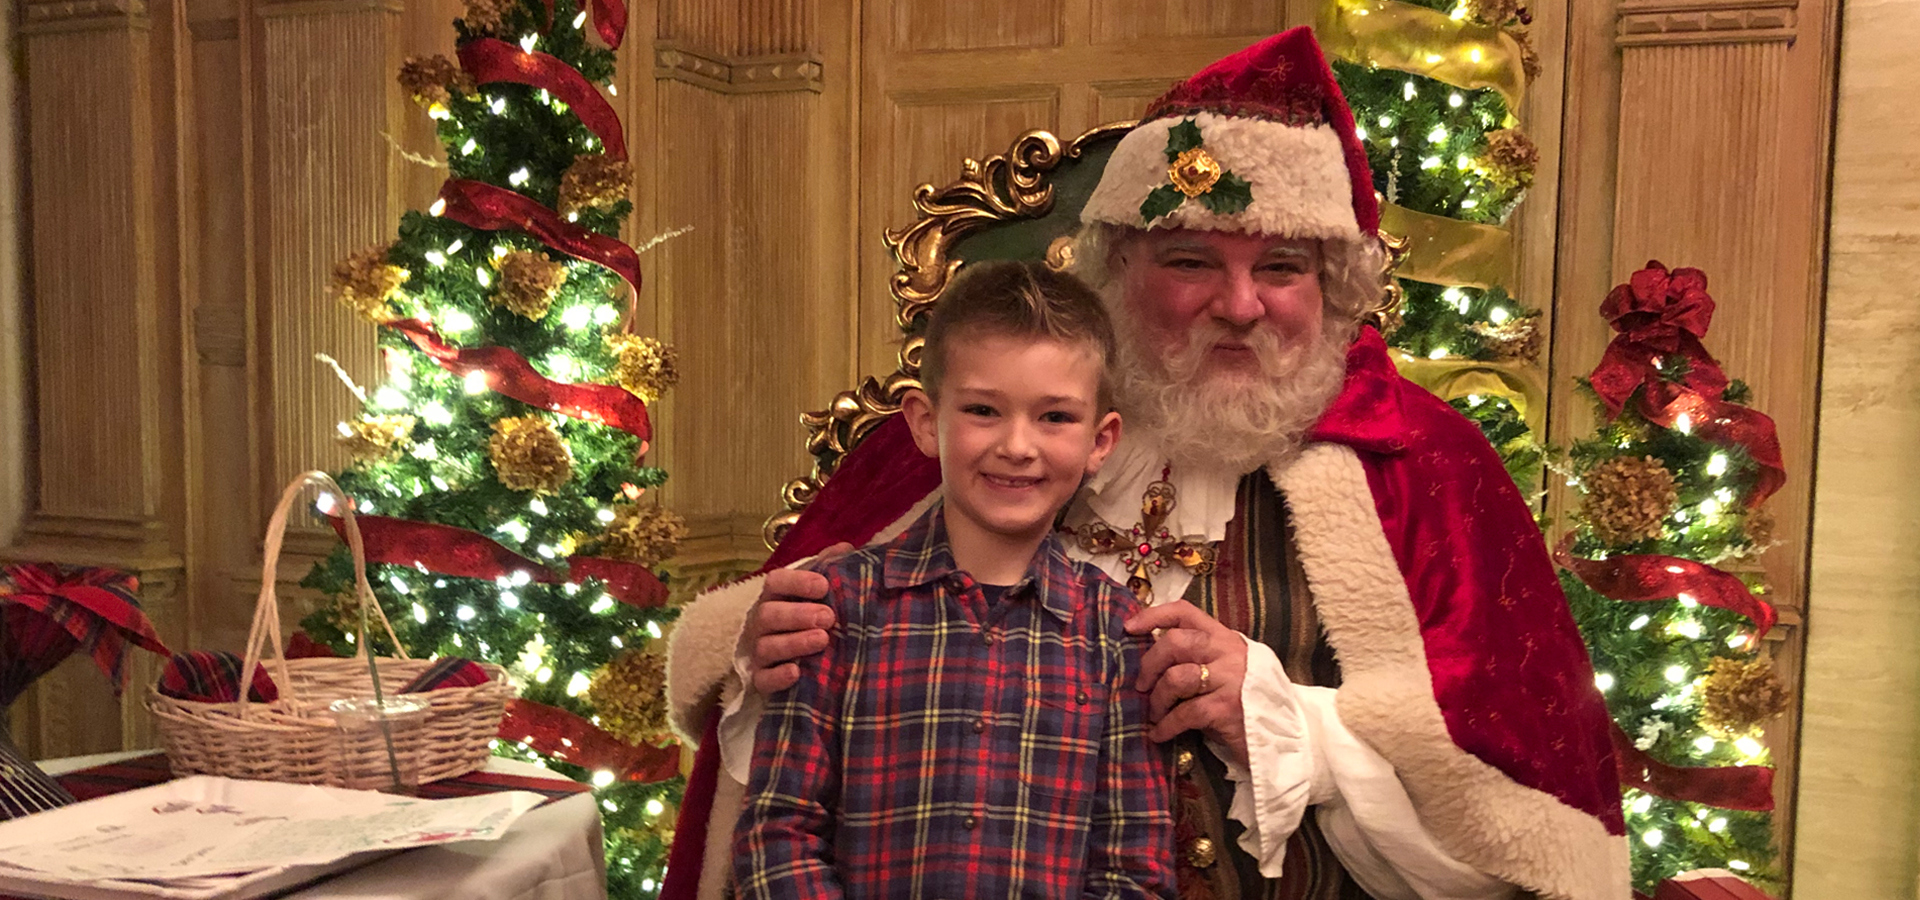 A child poses with St Nick